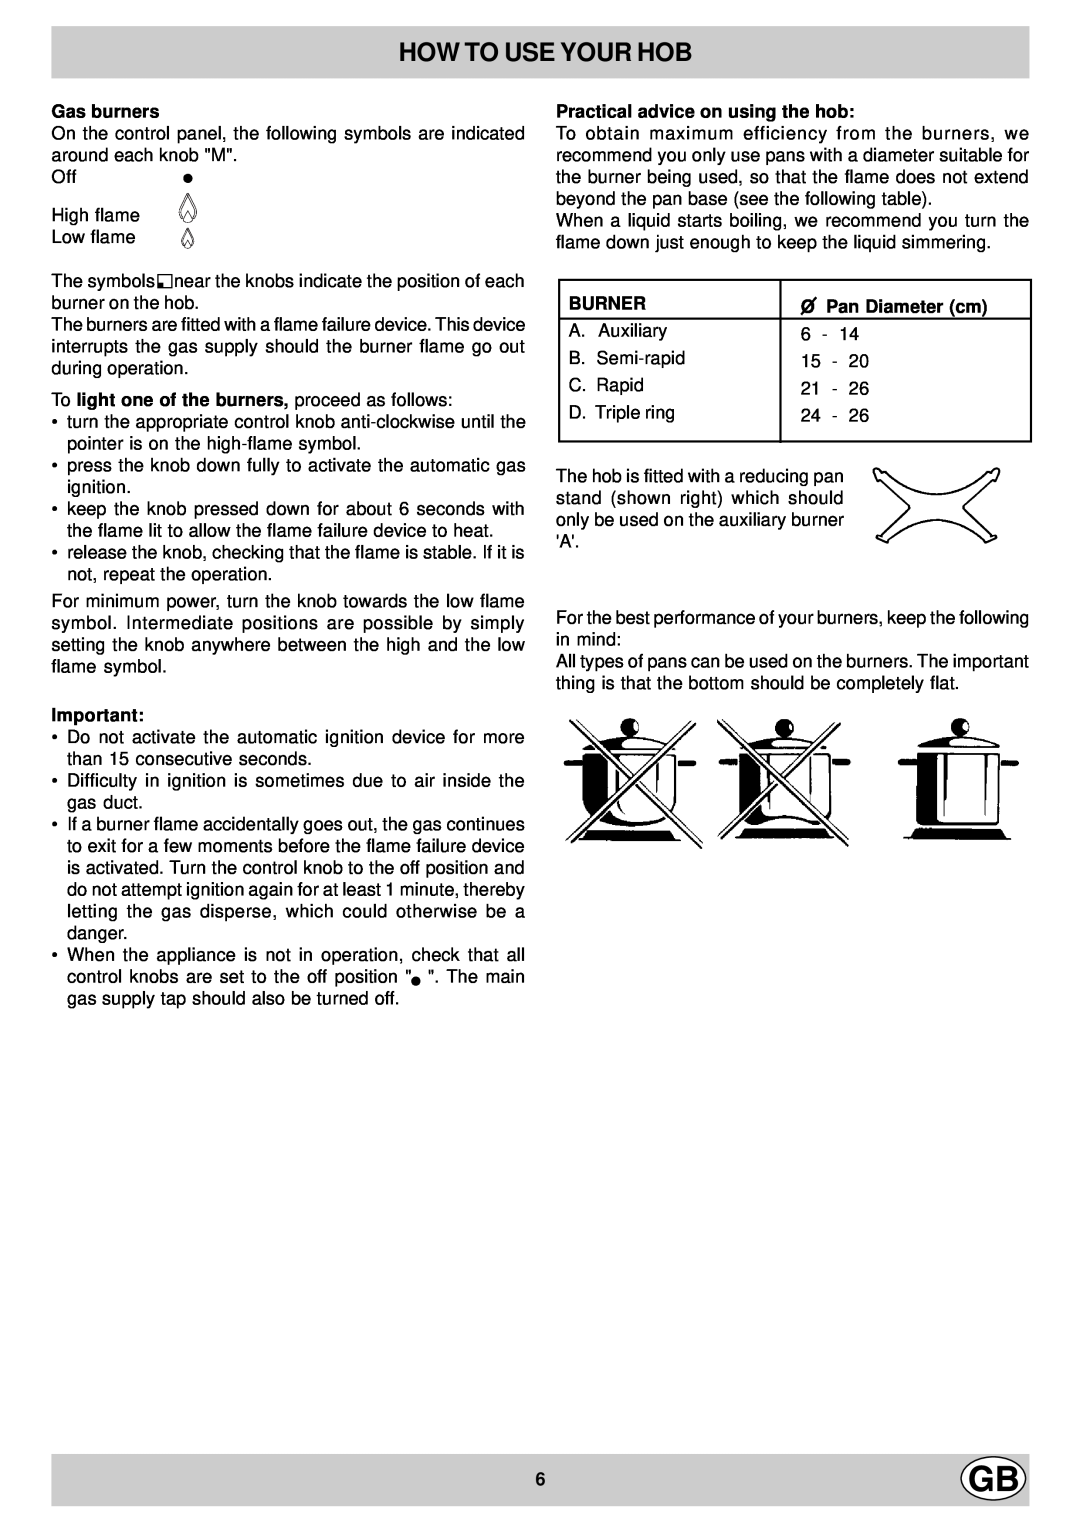 Hotpoint EG600X manual How To Use Your Hob, Gas burners, To light one of the burners, proceed as follows, Burner 